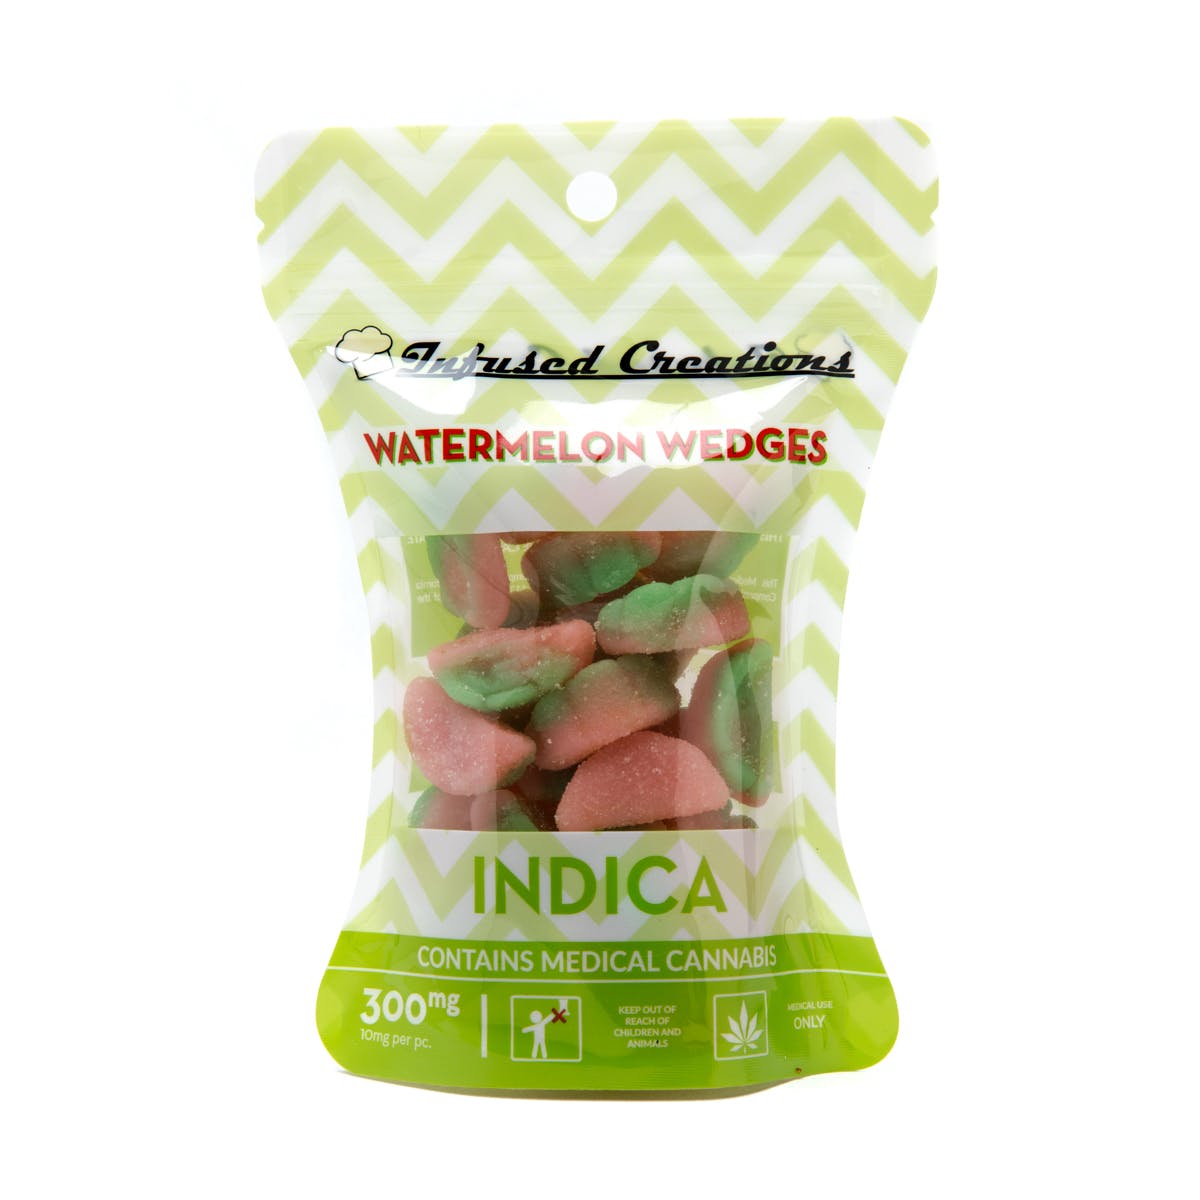 Watermelon Wedges Indica, 300mg